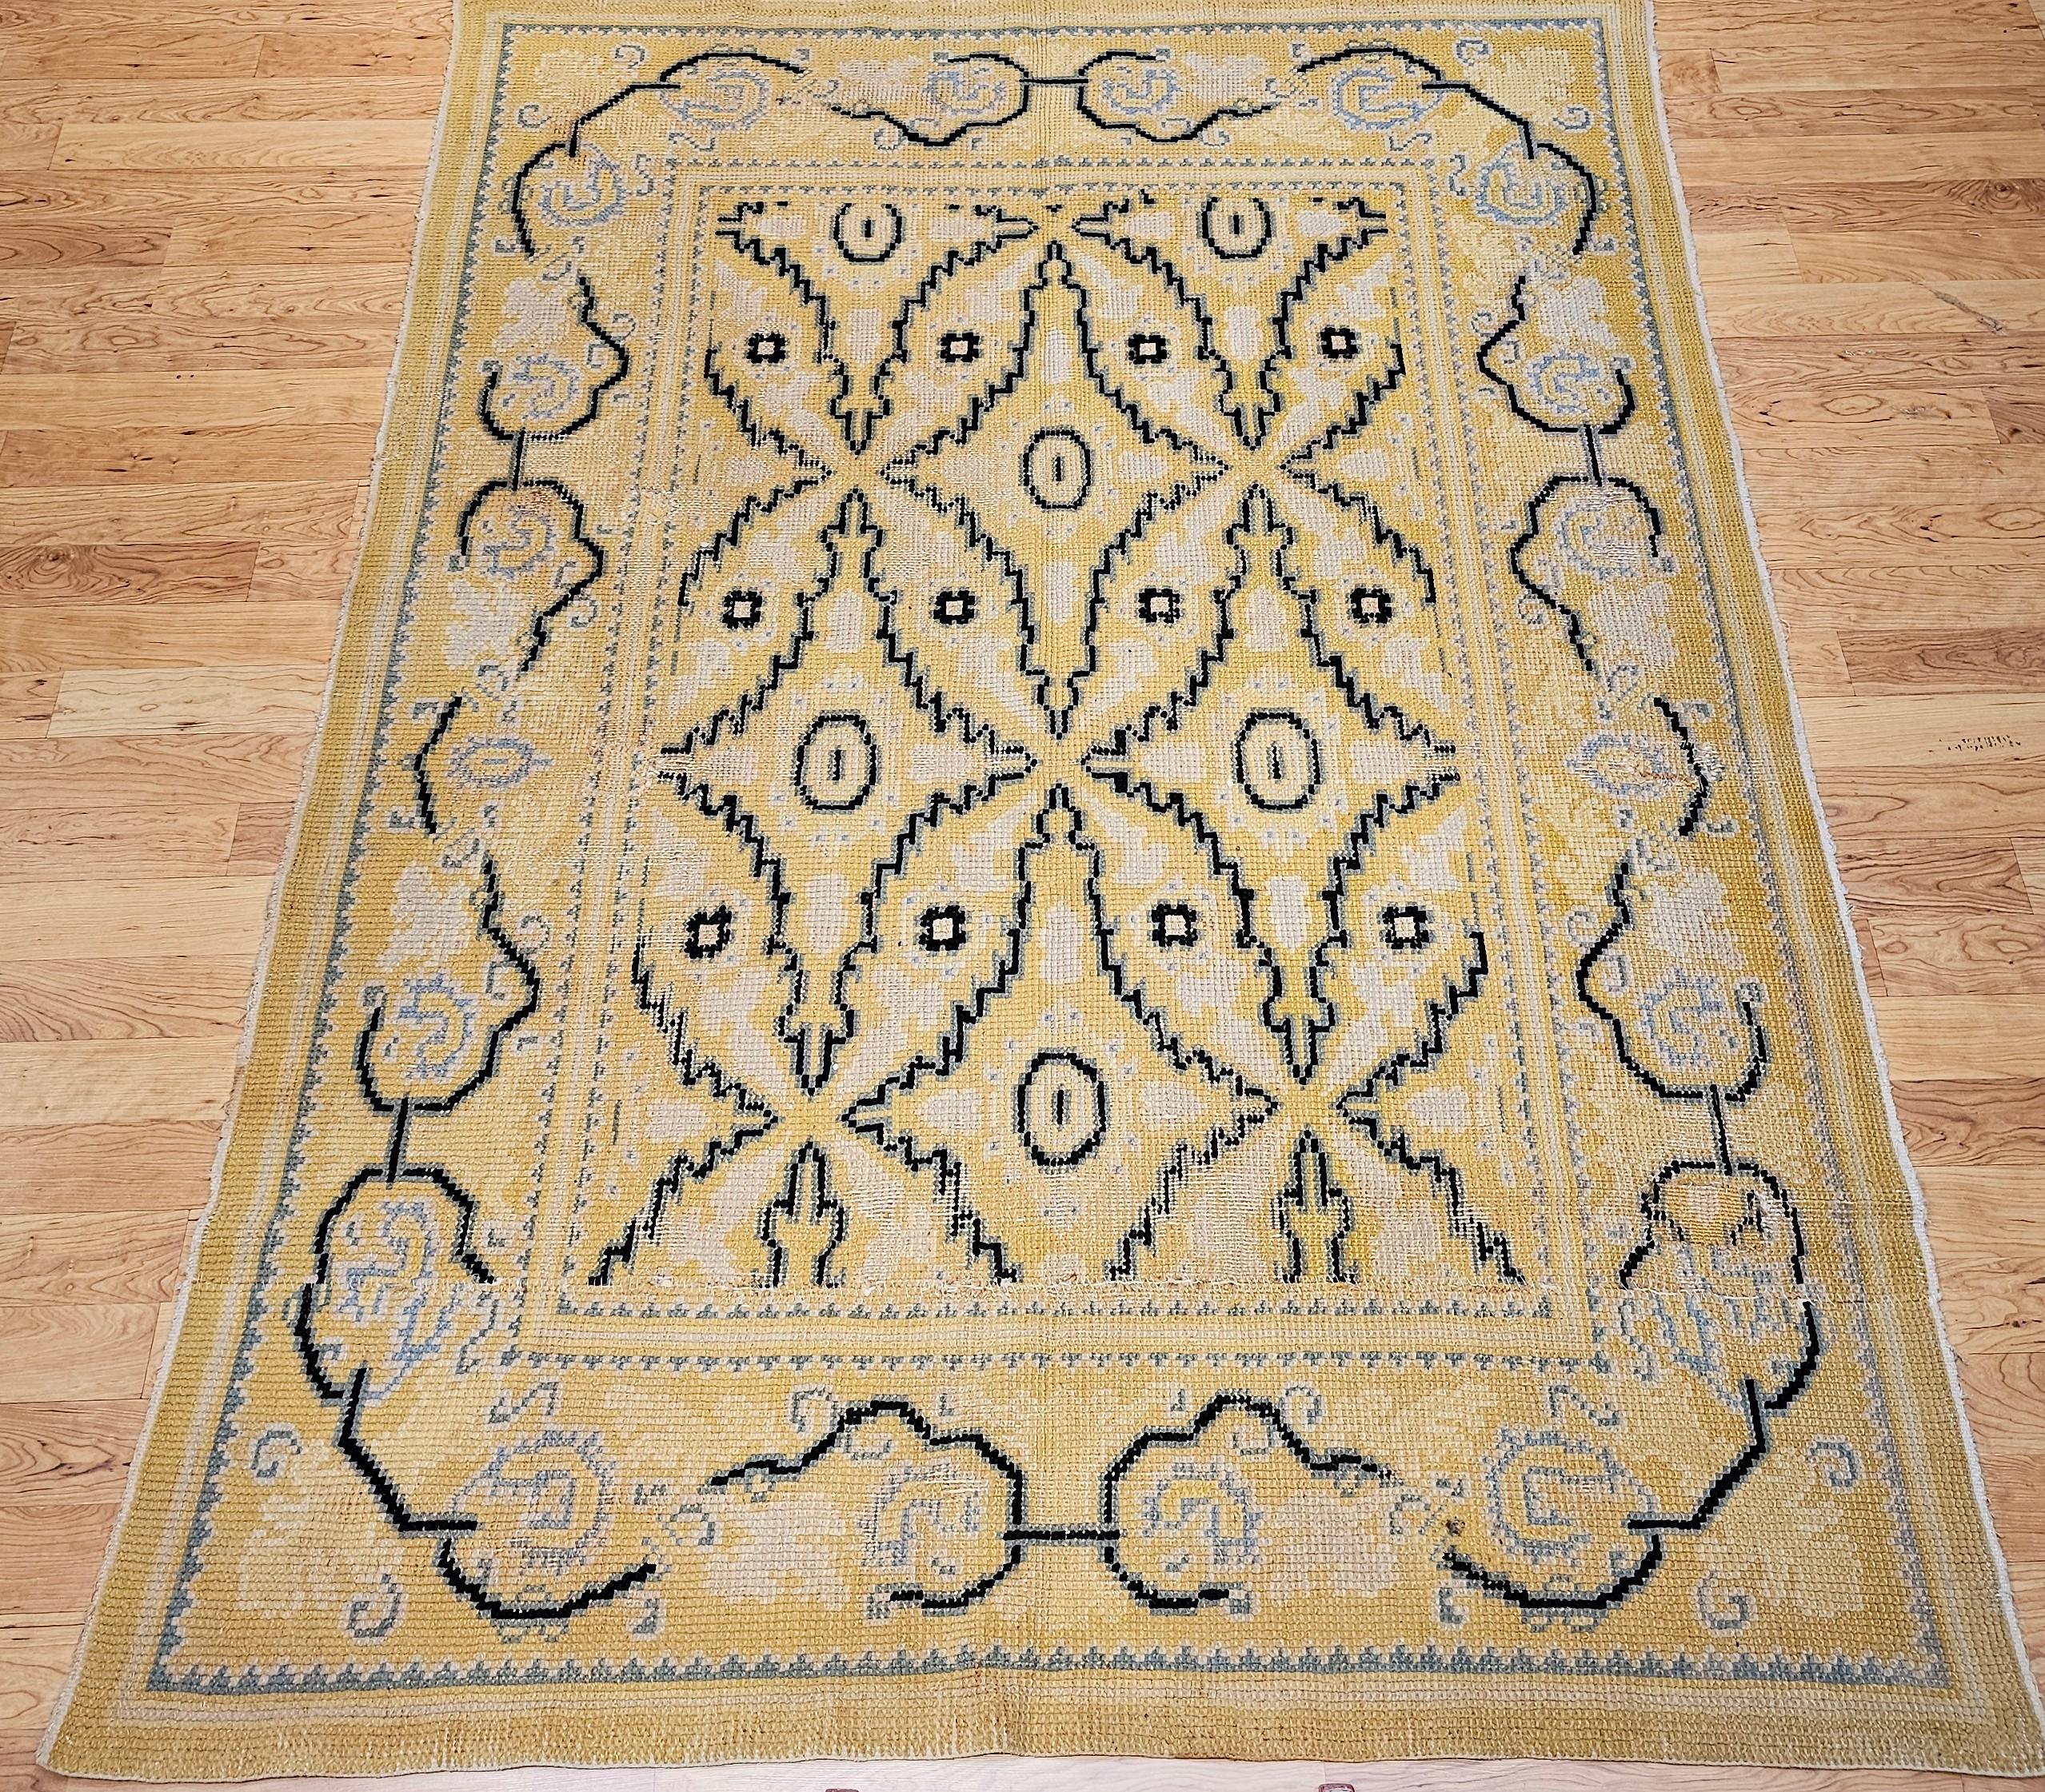 Vintage room-size hand-knotted French rug  with a modern all over geometric pattern in yellow, pale blue, back from the first quarter of the 1900s.   The design and colors used in the rug are reminiscent of vintage mid century Swedish rugs and